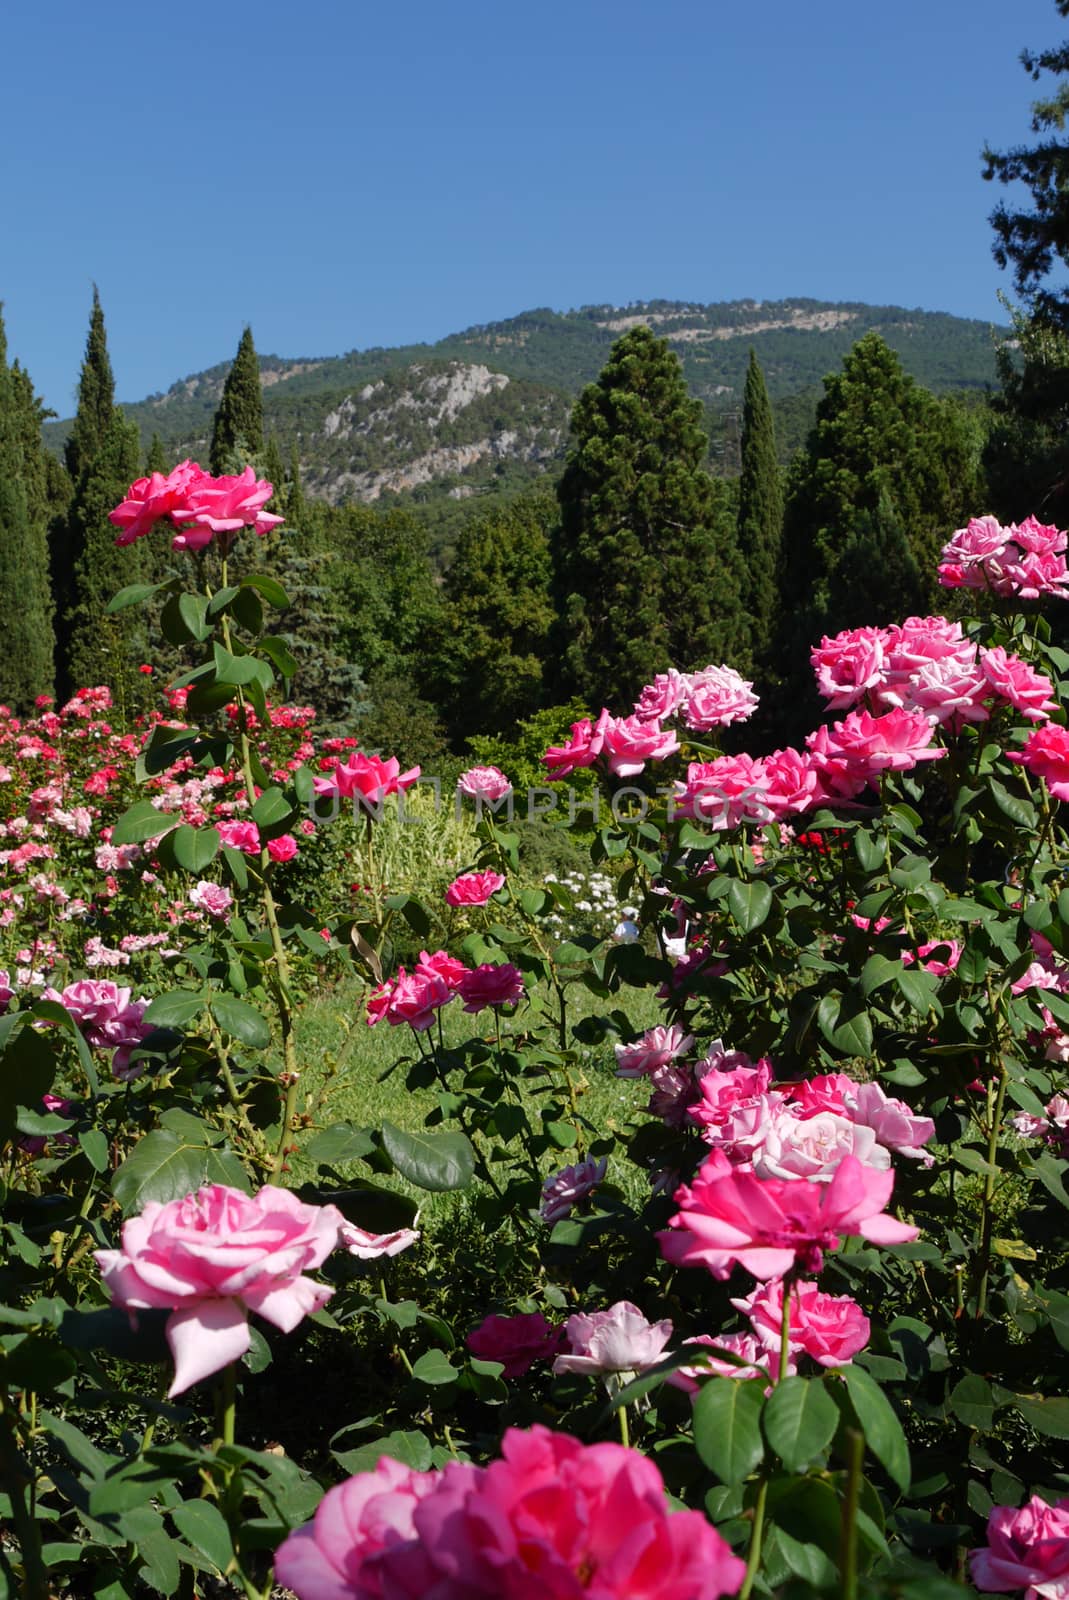 bushes of roses on the background of cypresses in the Crimean mountains